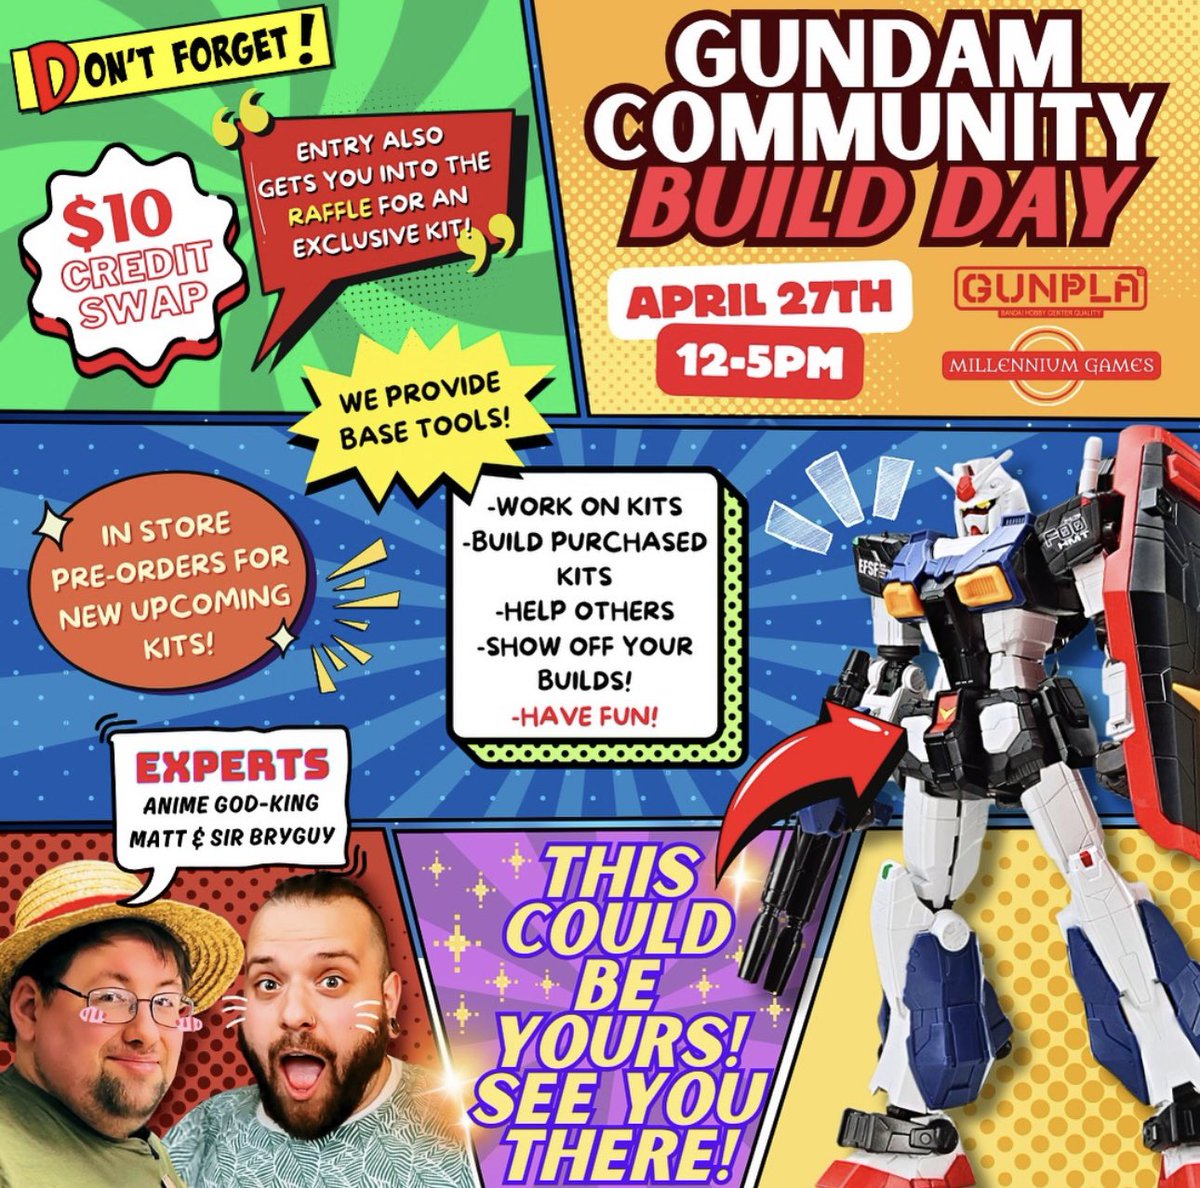 Gundam community build day is TOMORROW here at Millennium!🔥✨ make sure you grab your gundam and come on by, we’ll be doing a giveaway and having an absolute blast all day! See you tomorrow, team! 💫